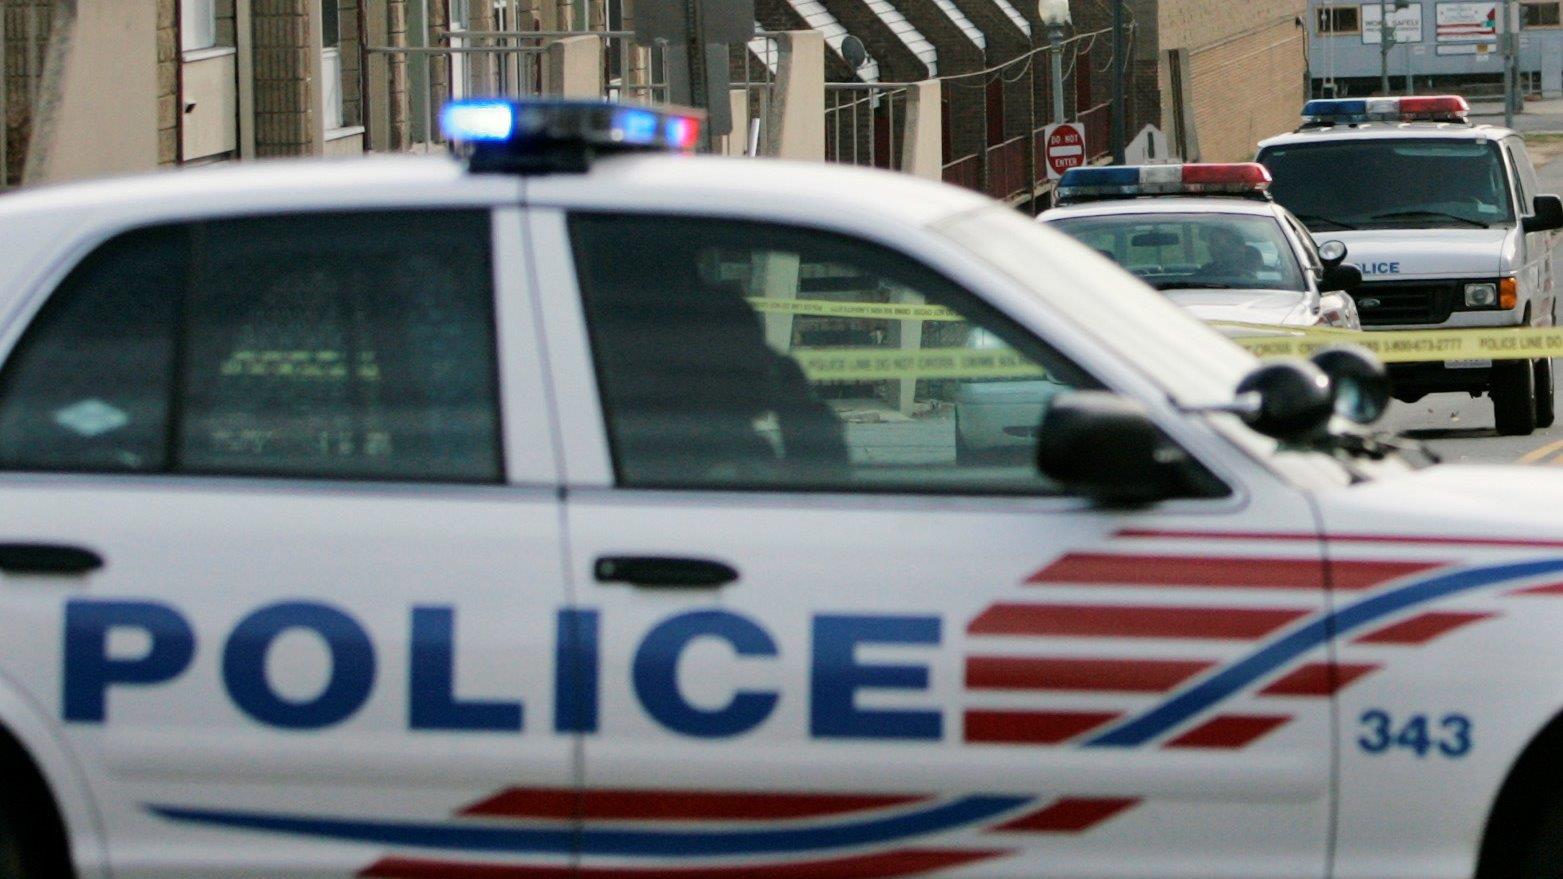 DC officer charged with attempting to support ISIS